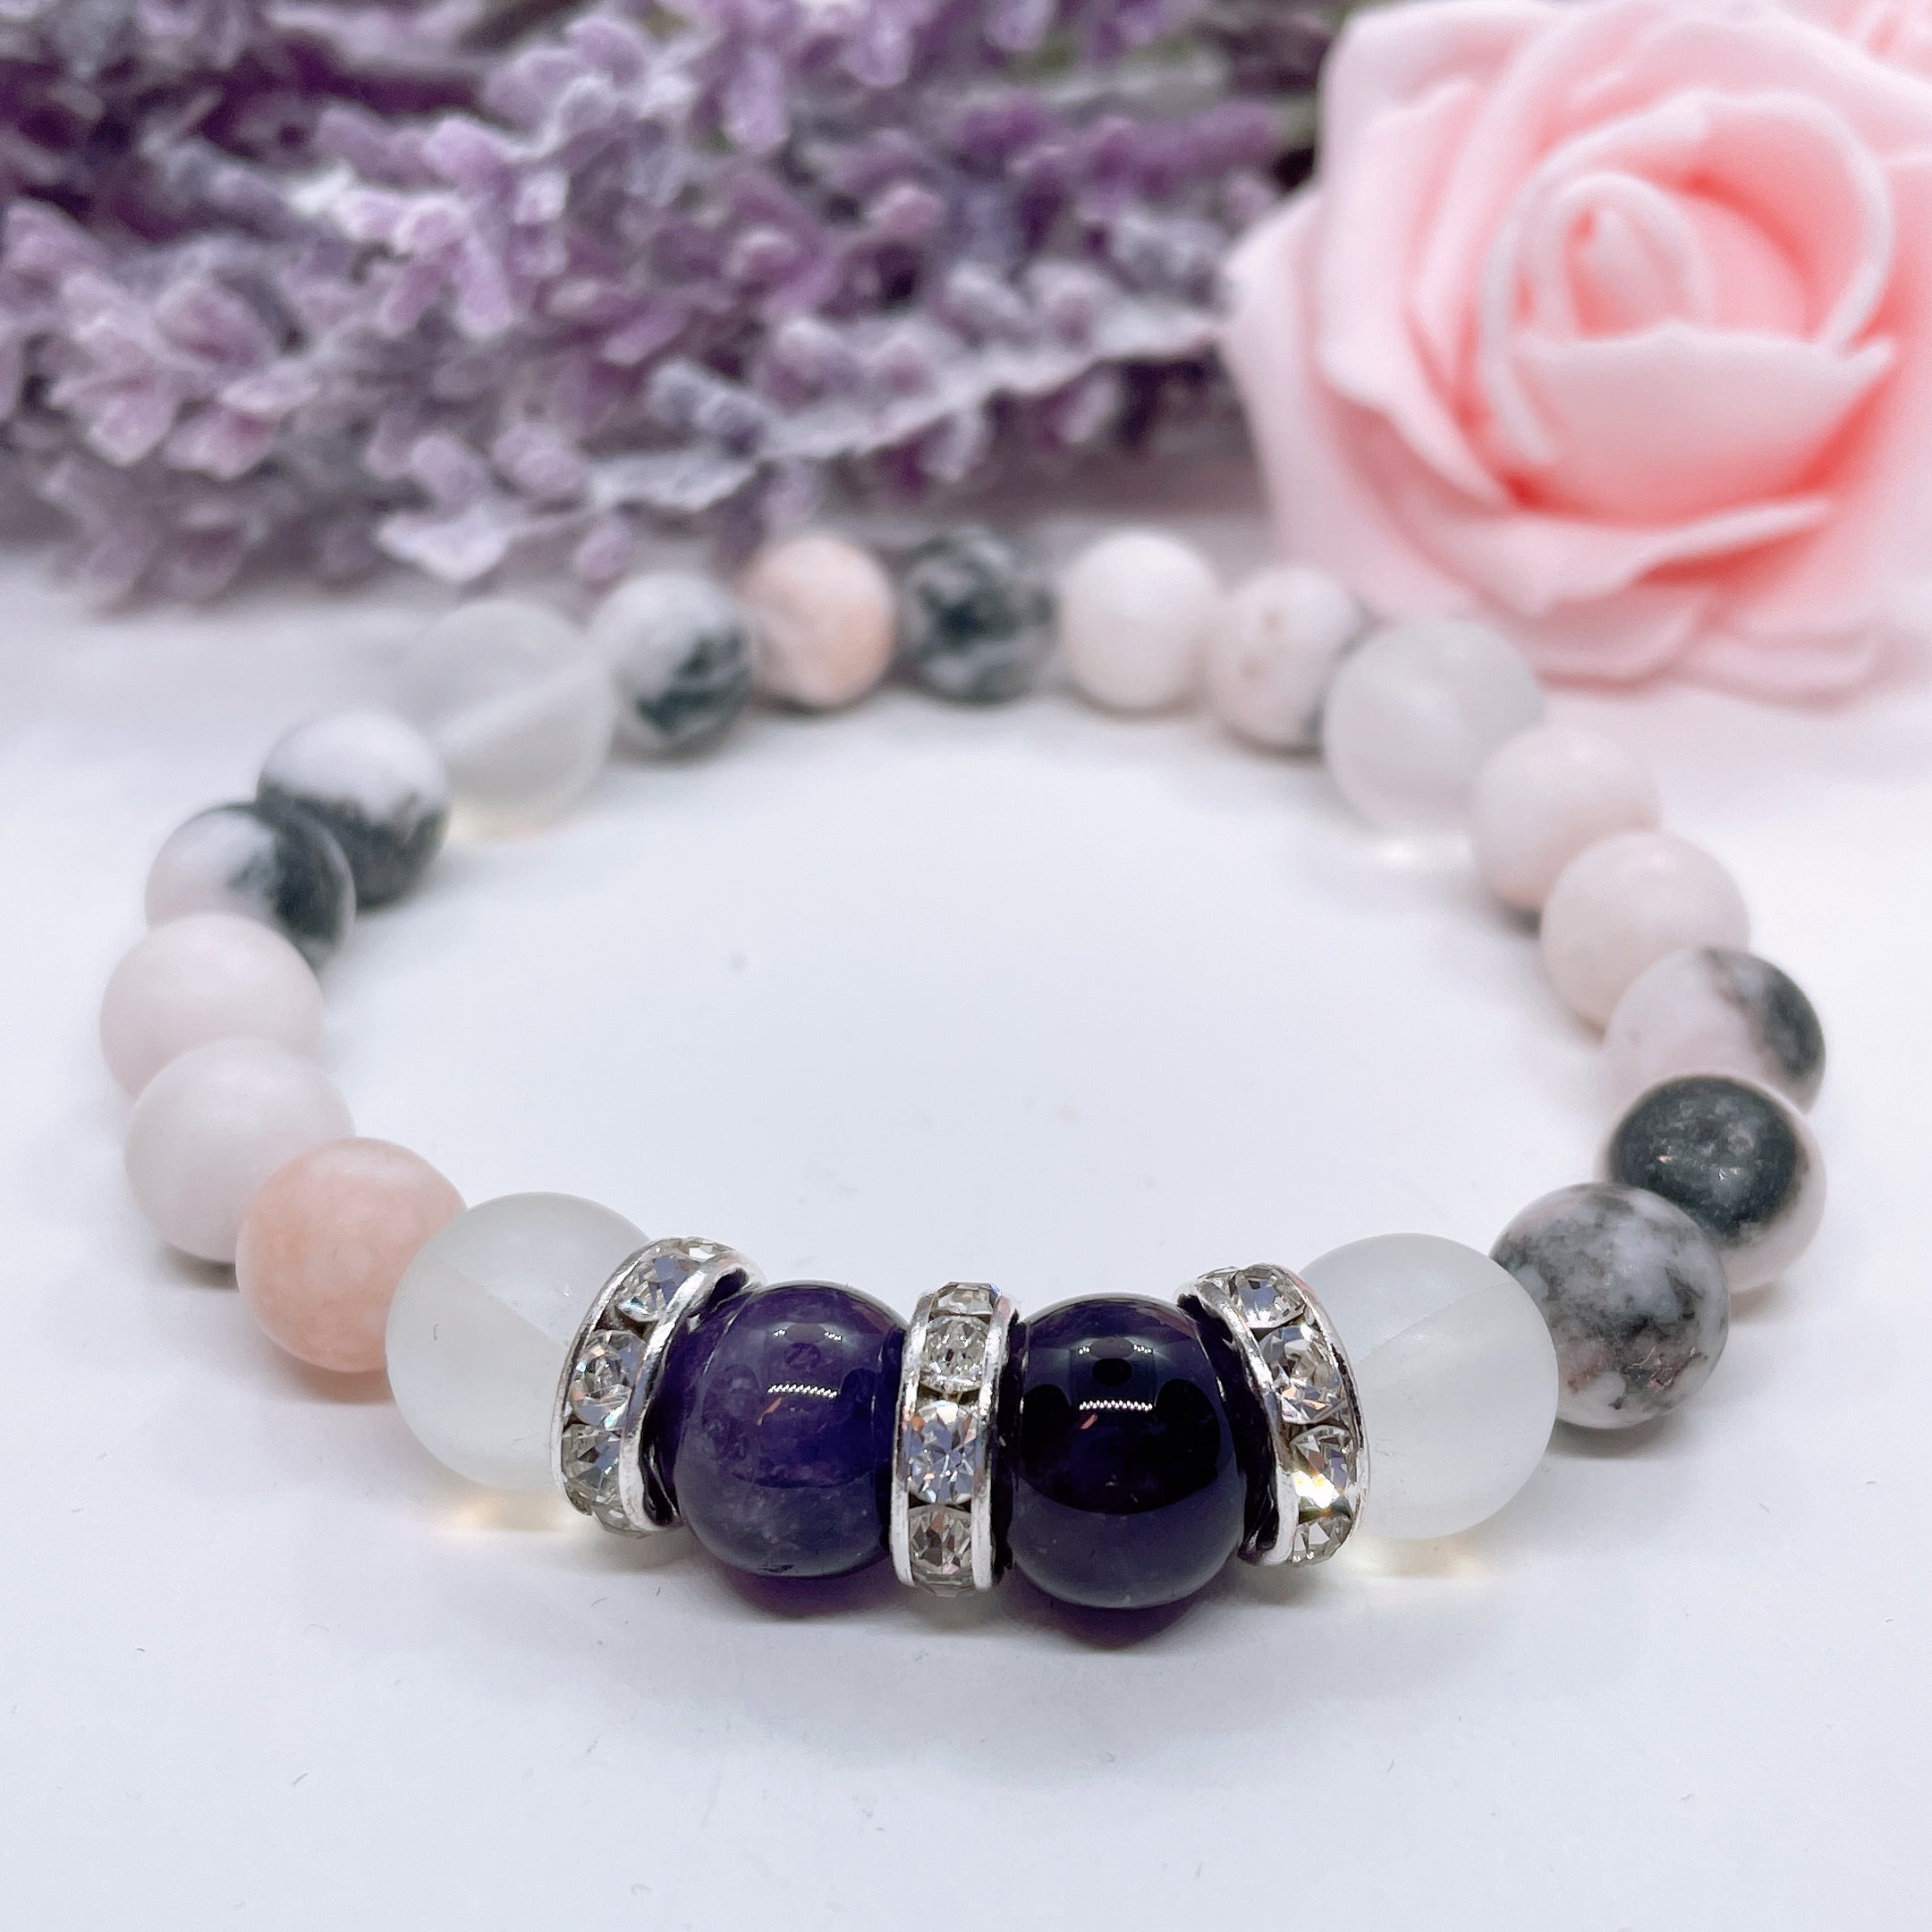 An Amethyst Rhinestone and Gemstone stretch bracelet made with 2 dark purple amethyst gemstones, translucent aura beads, and rhinestone accents for added sparkle sits on a white table. 